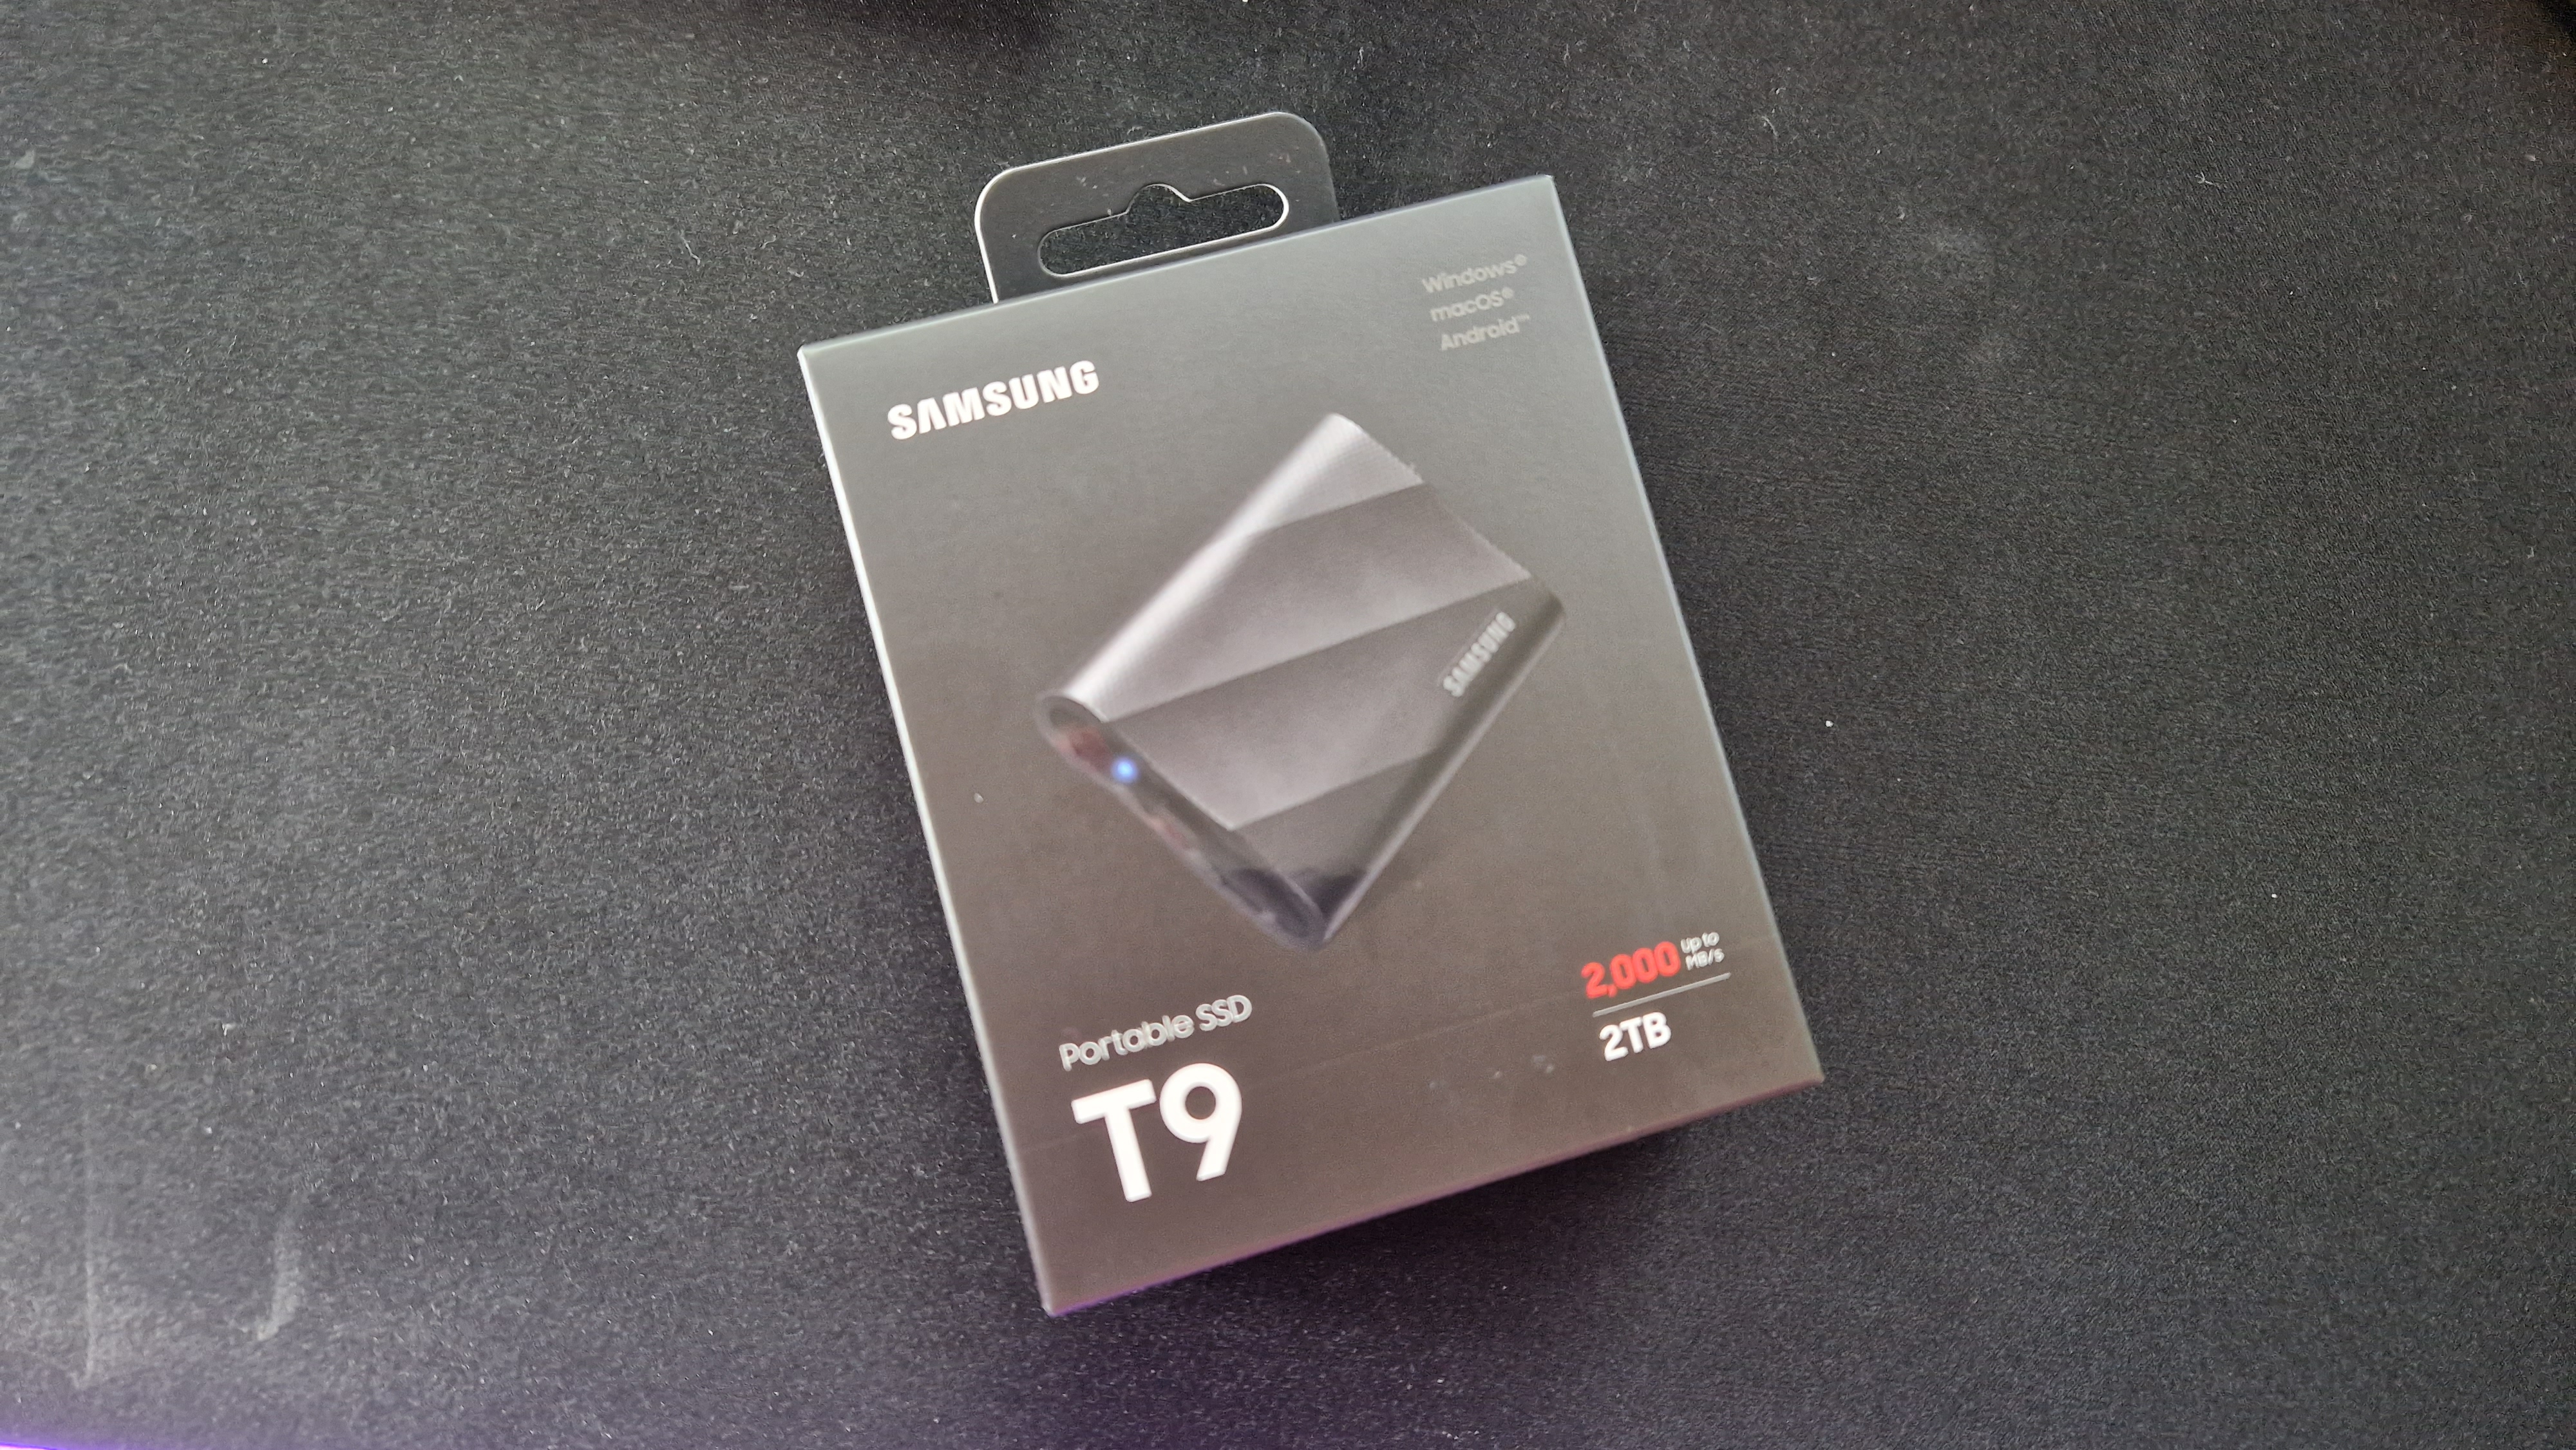 Samsung T9 portable SSD in its box